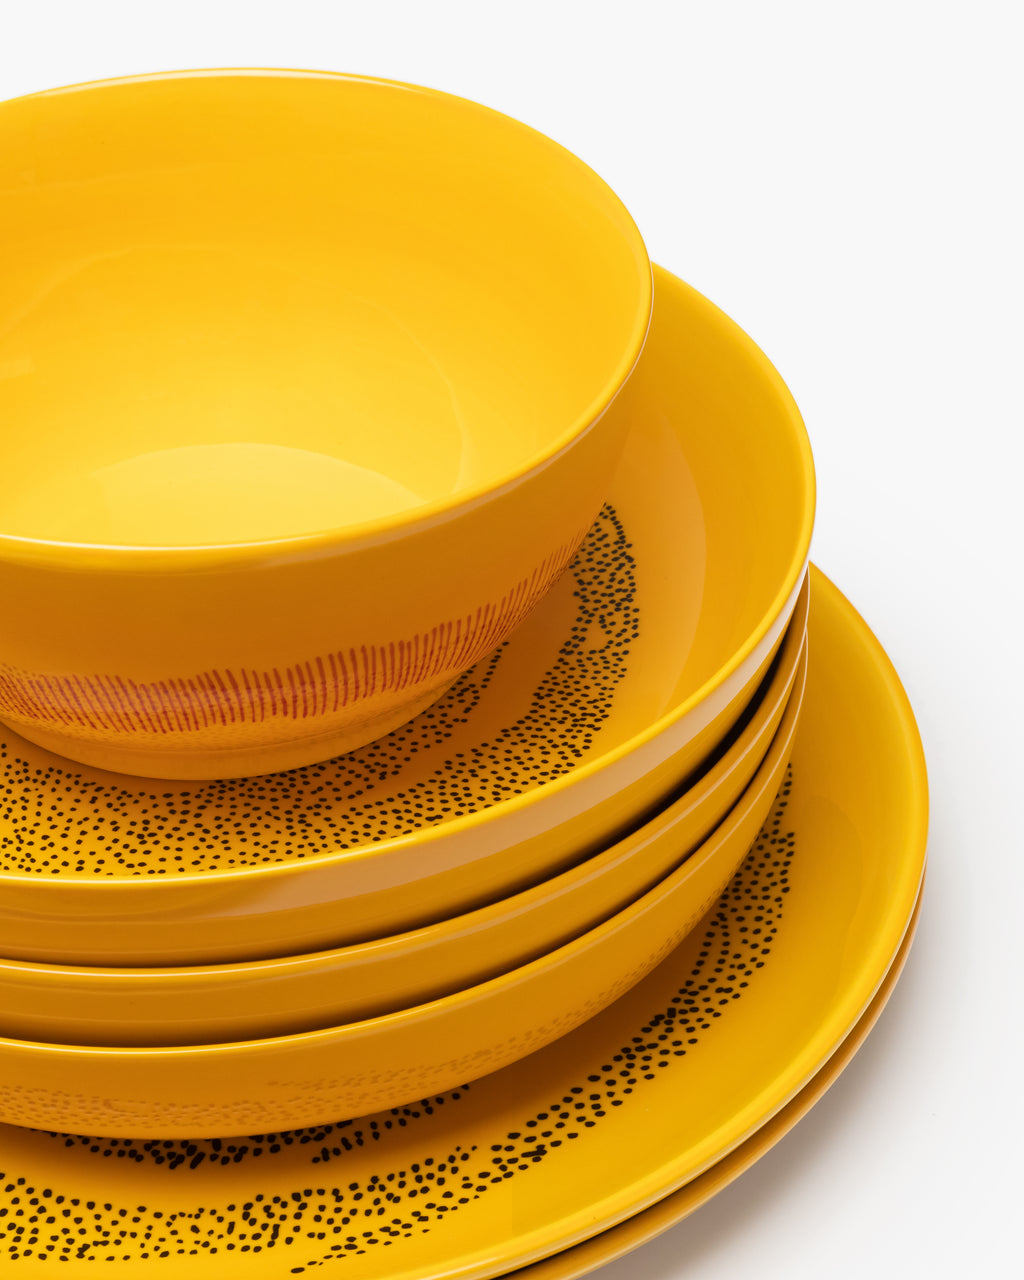 Full Set 24 pieces - Feast tableware by Ottolenghi - yellow